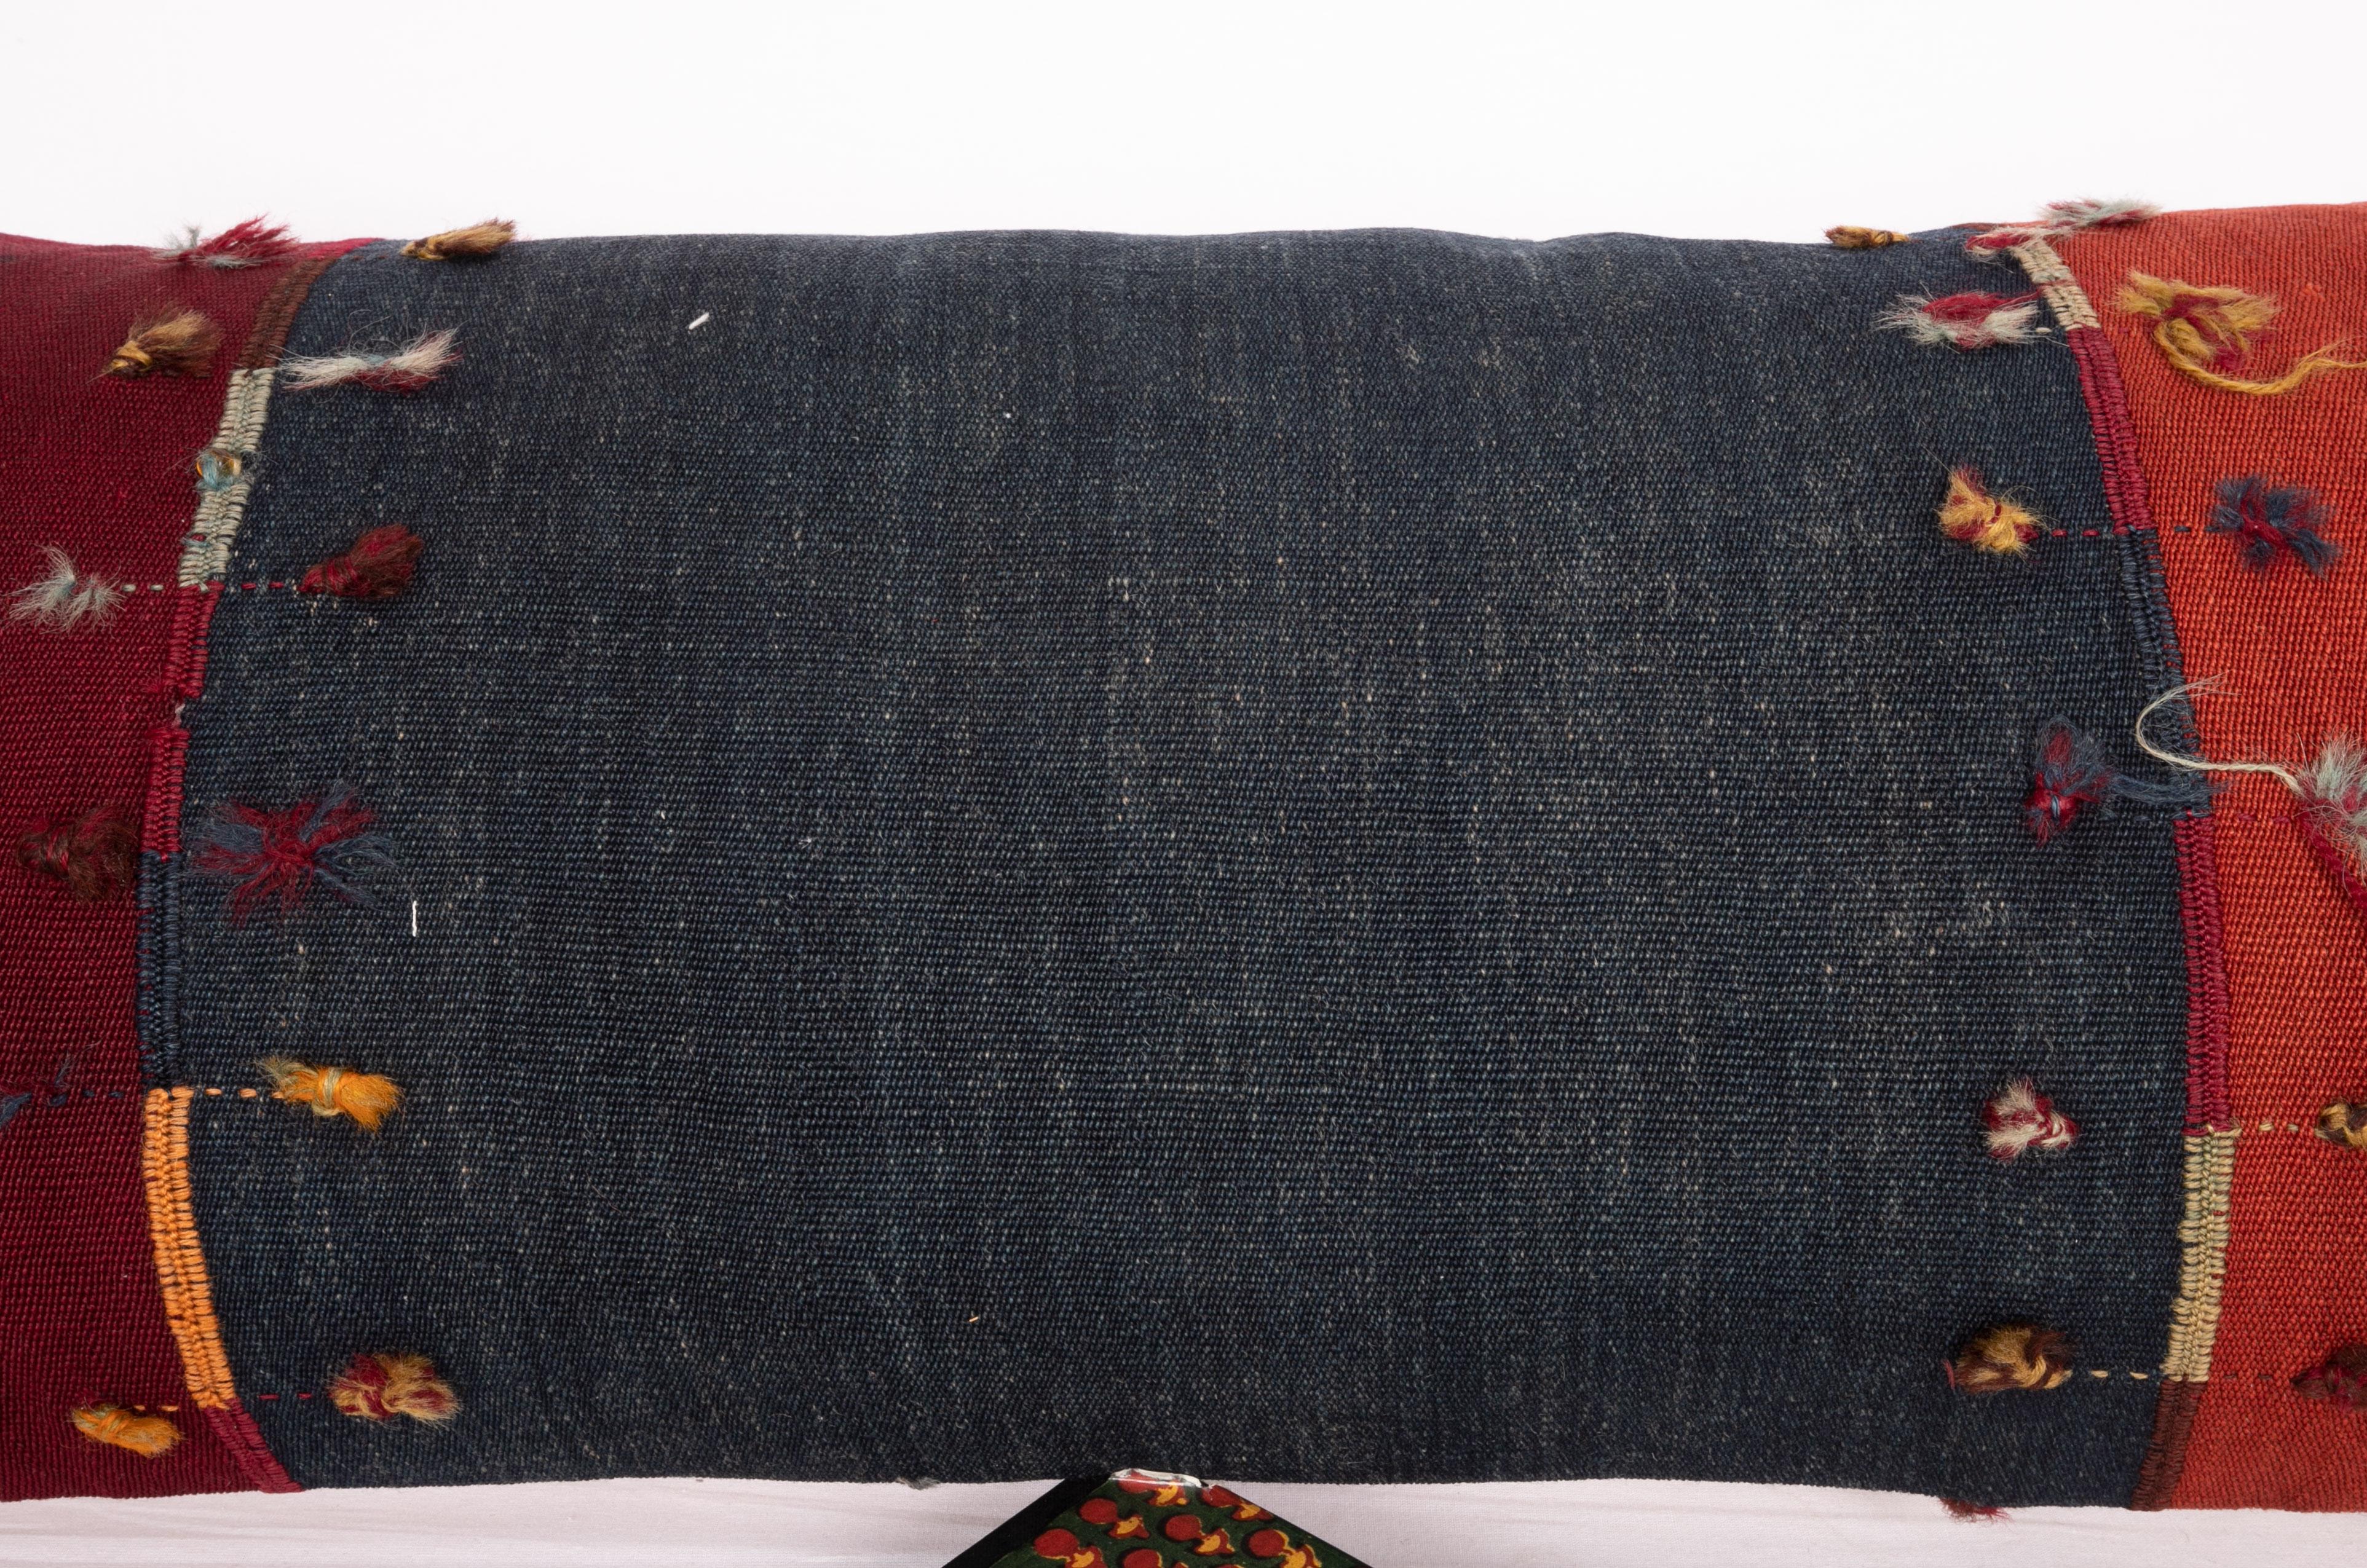 19th Century Antique Lumbar Pillow Case Made from an Eastern Anatolian Cover, Late 19th C